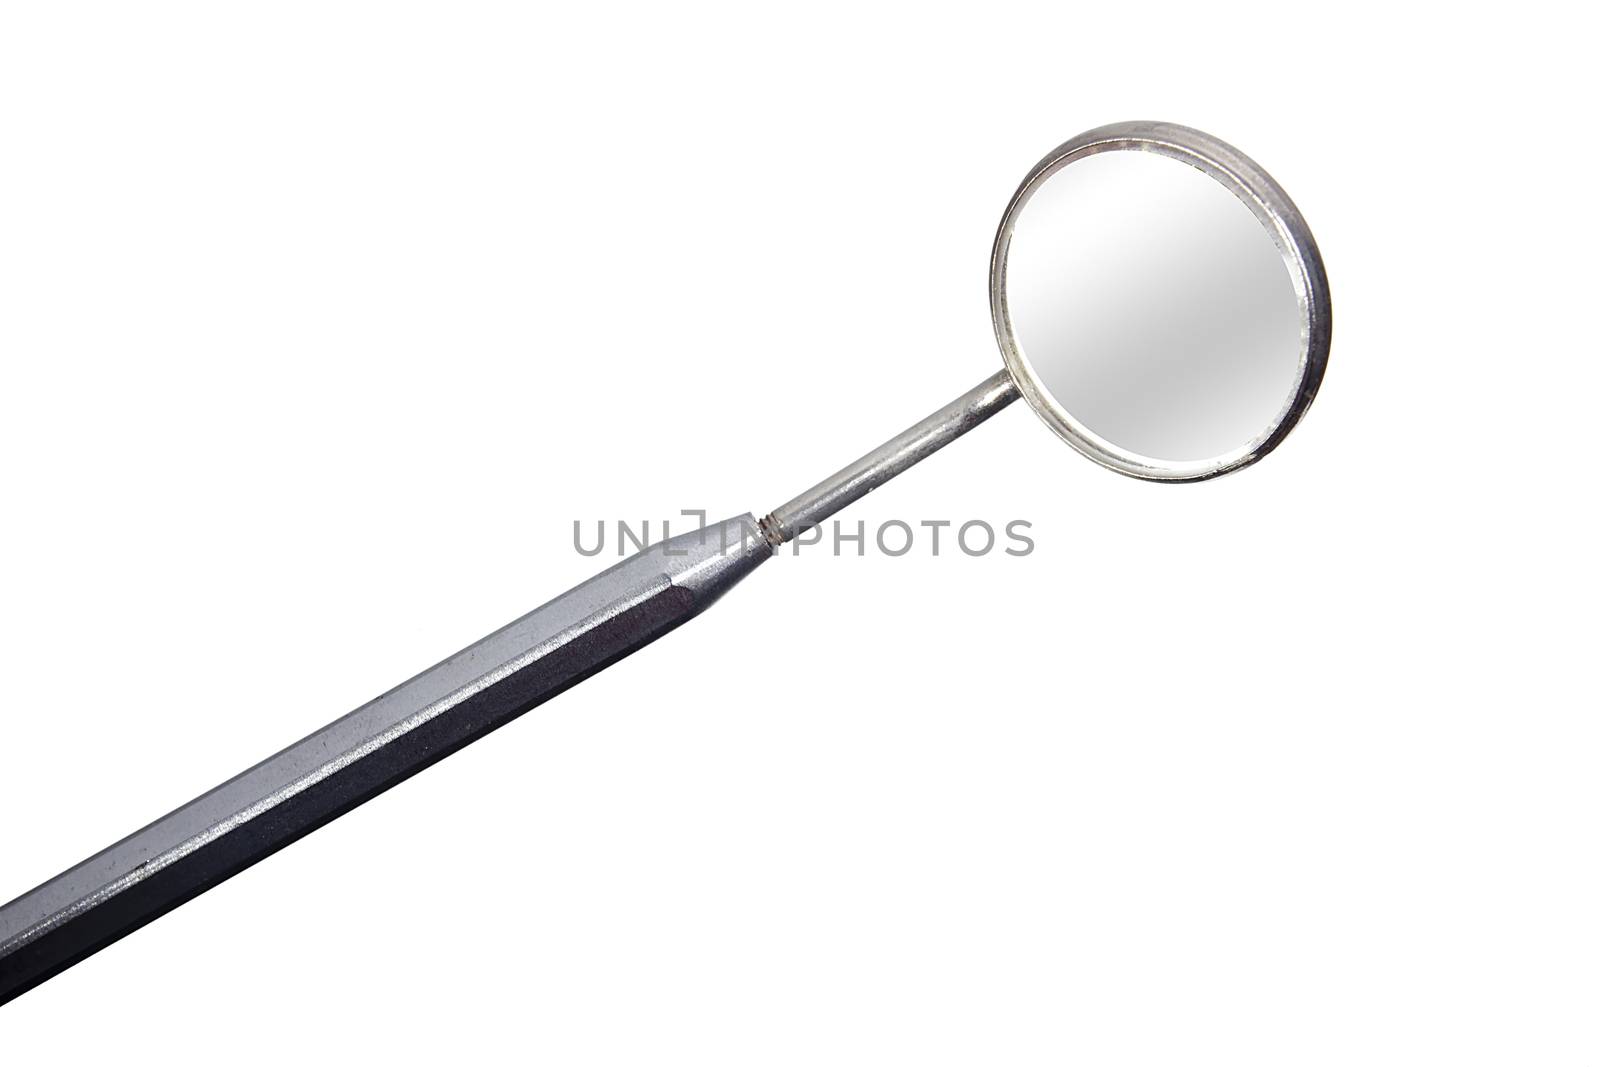 Dental tools. Dental tools on a white background